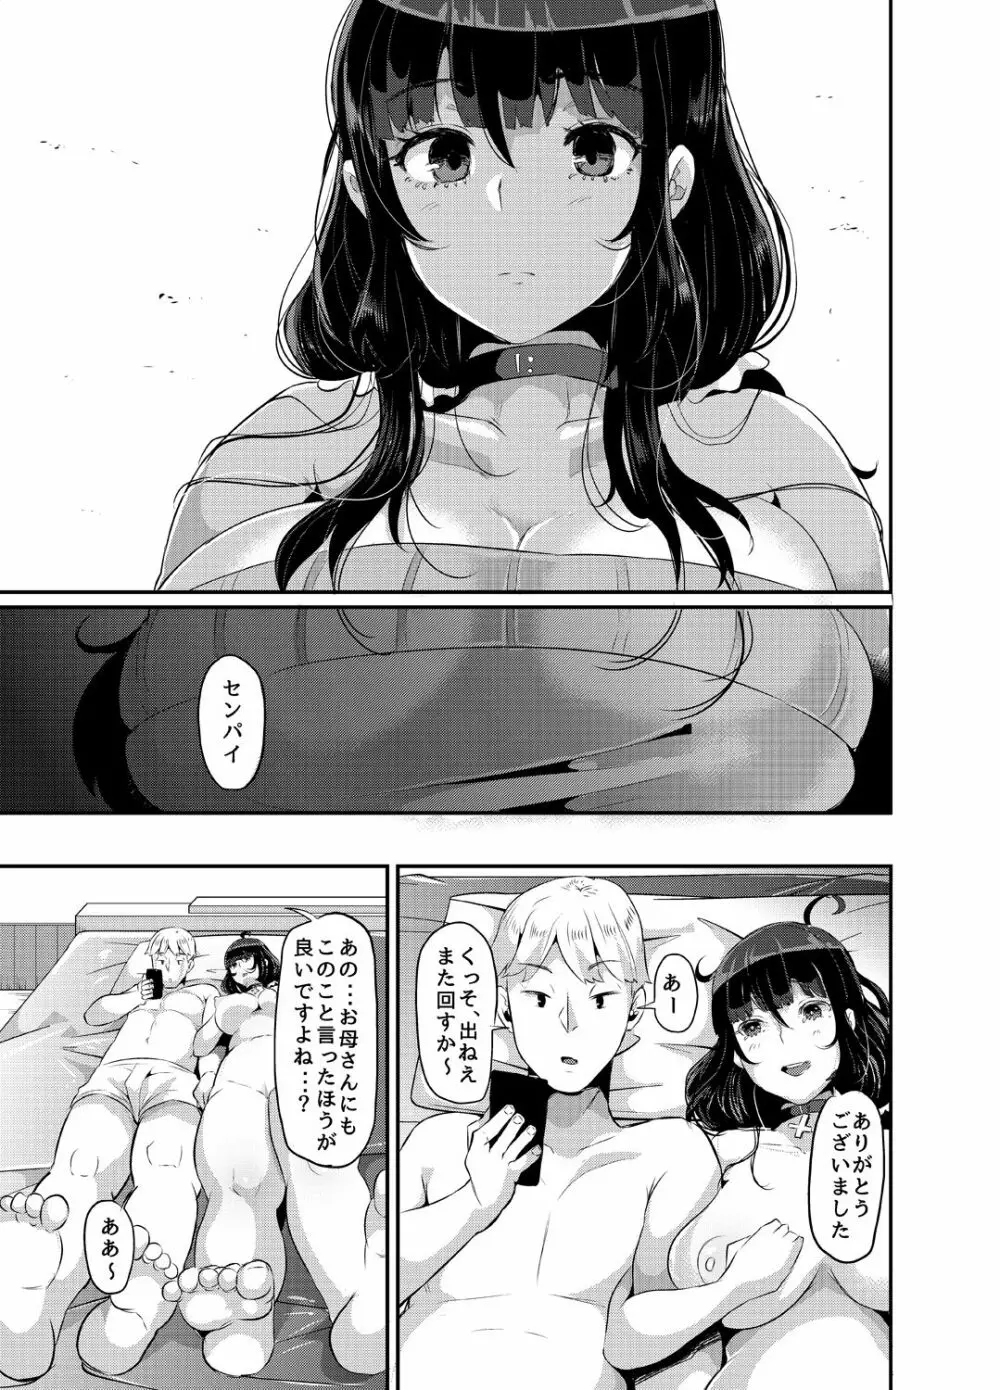 好き好き好き好き好き好き好き好き ver.4 - page24